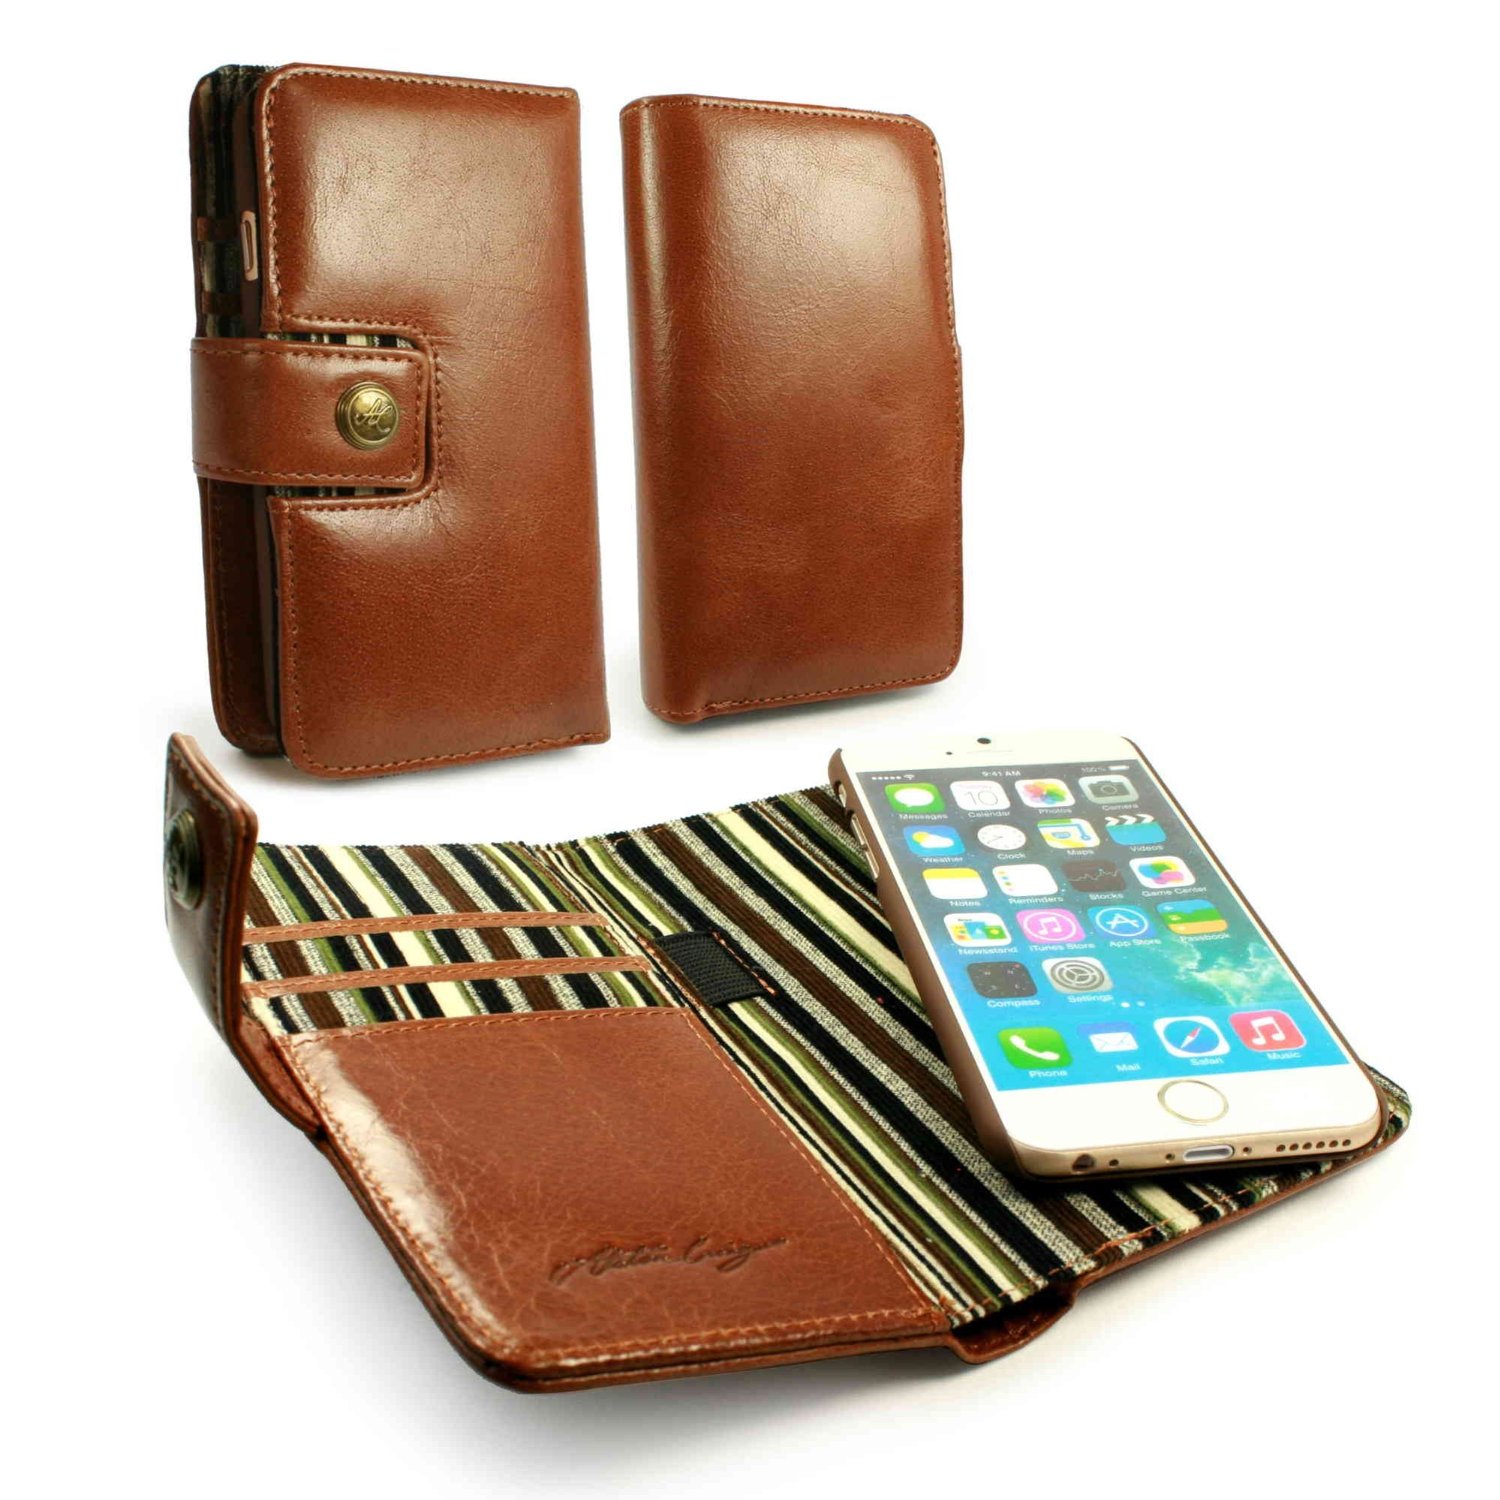 leather iphone 6 case, iphone 6 wallet case, best iphone 6 case